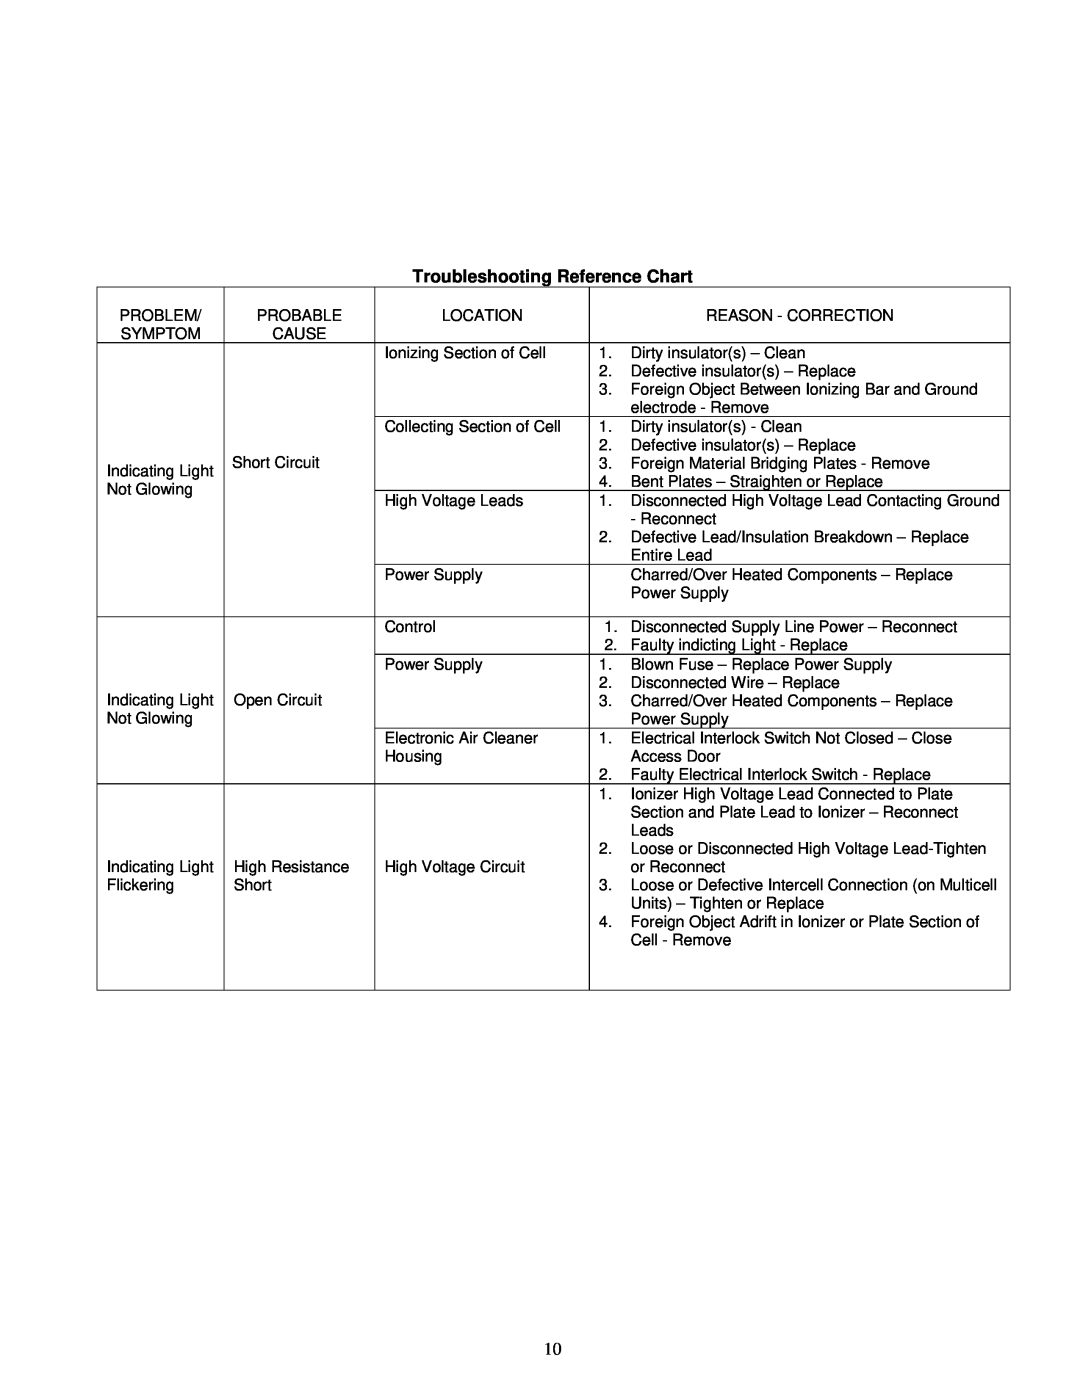 Trion 60 manual Troubleshooting Reference Chart 